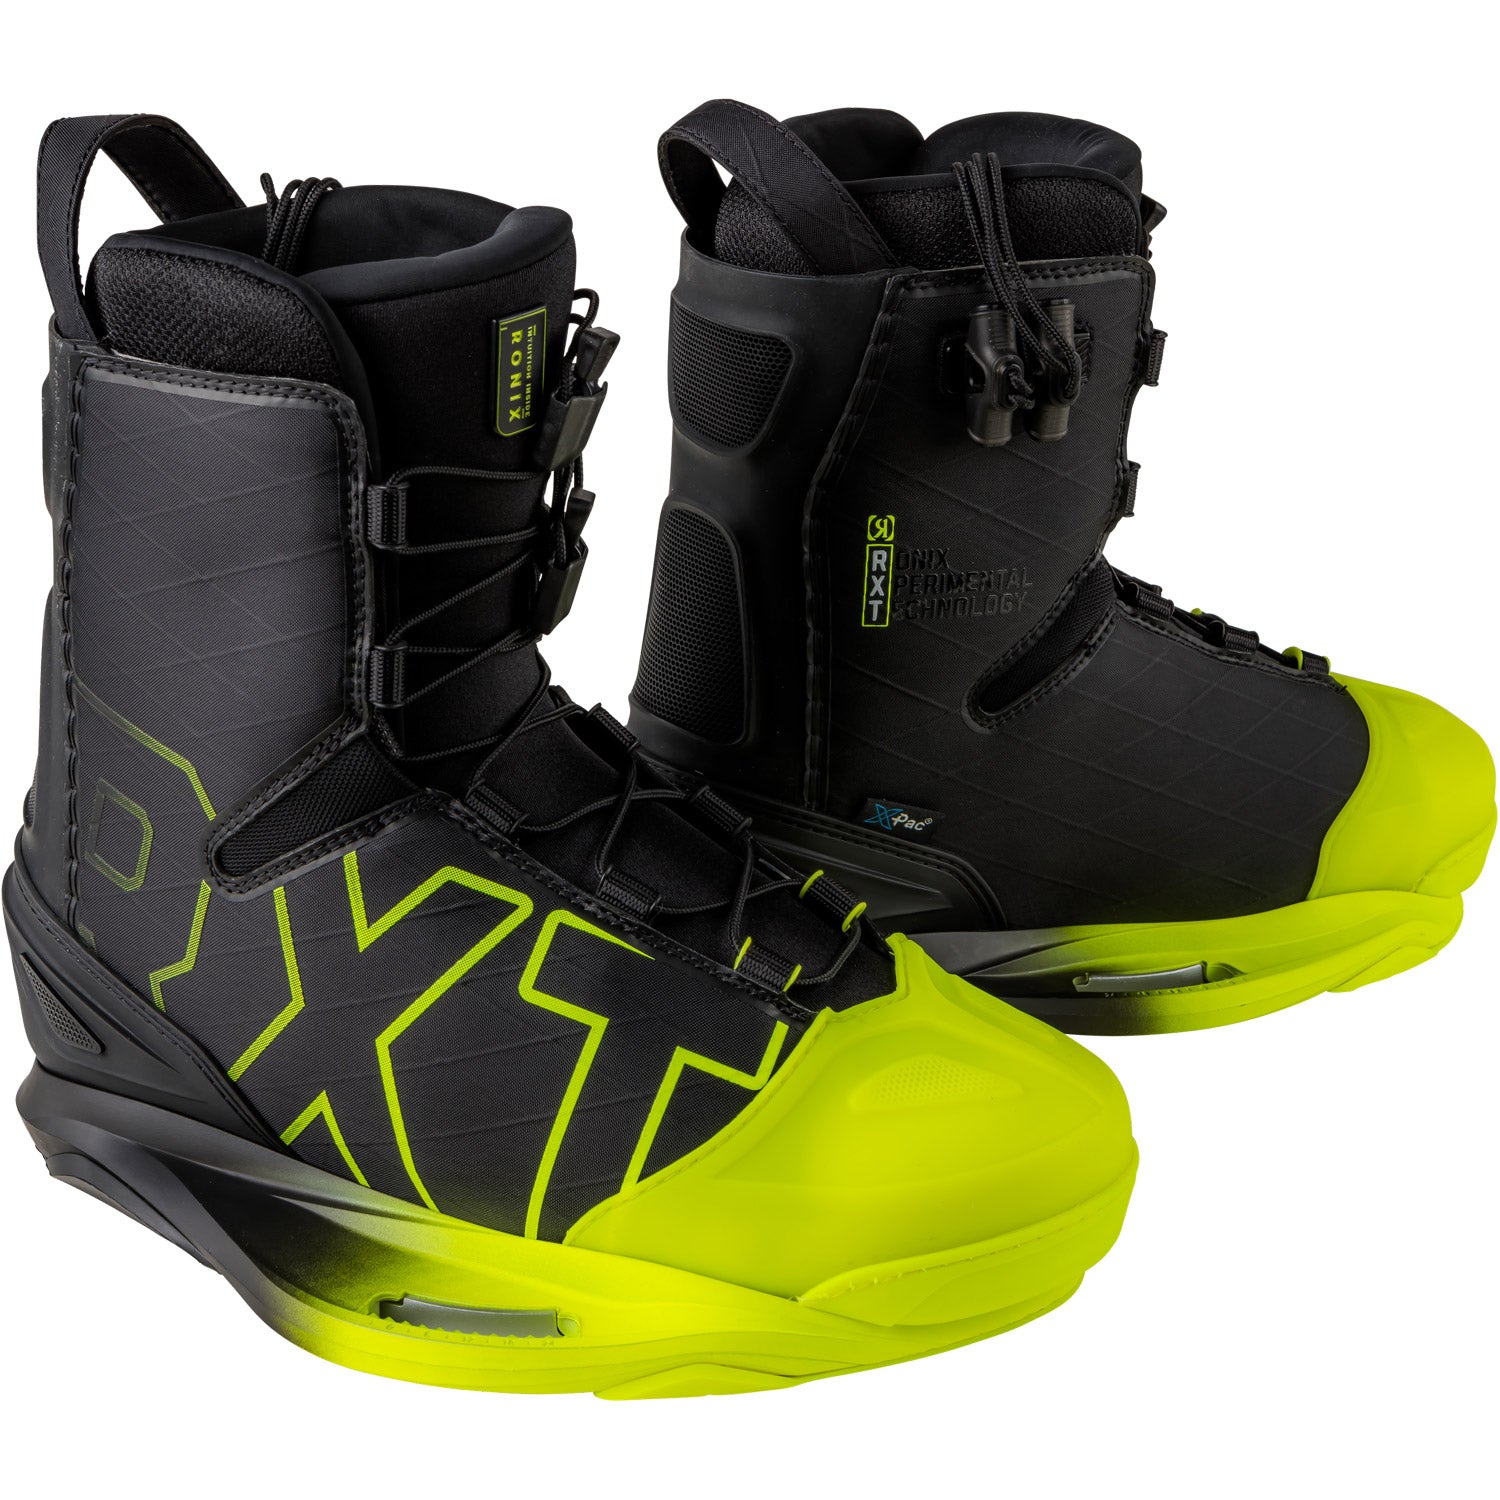 RXT Mens Wakeboard Boots